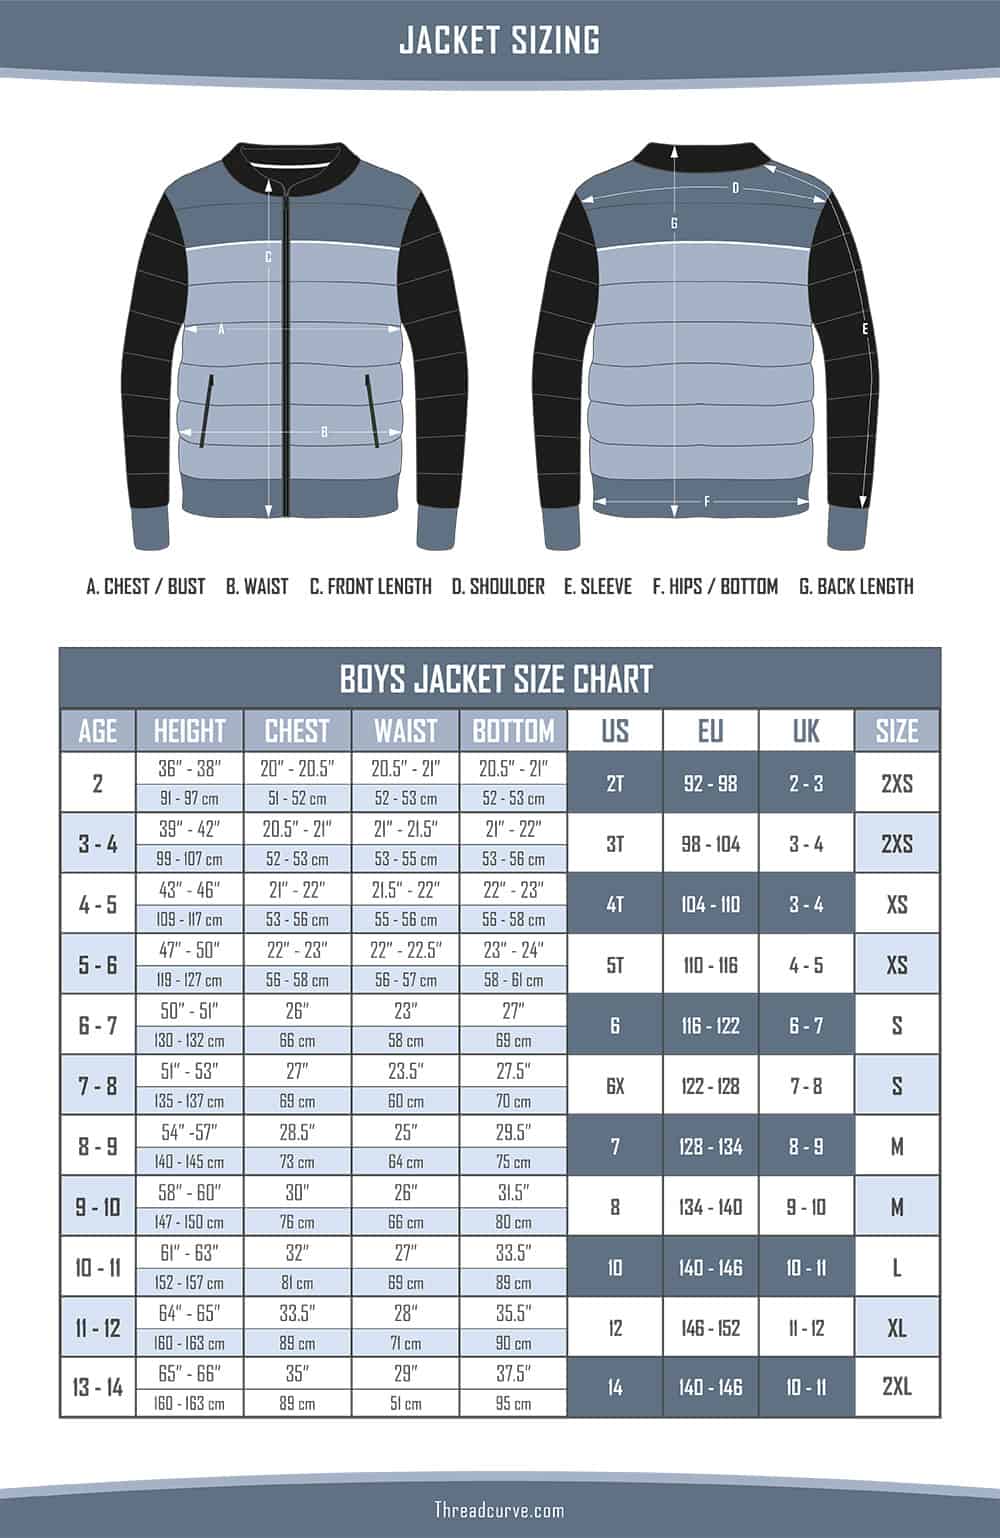 This is the chart for the Boys Jackets Sizes.